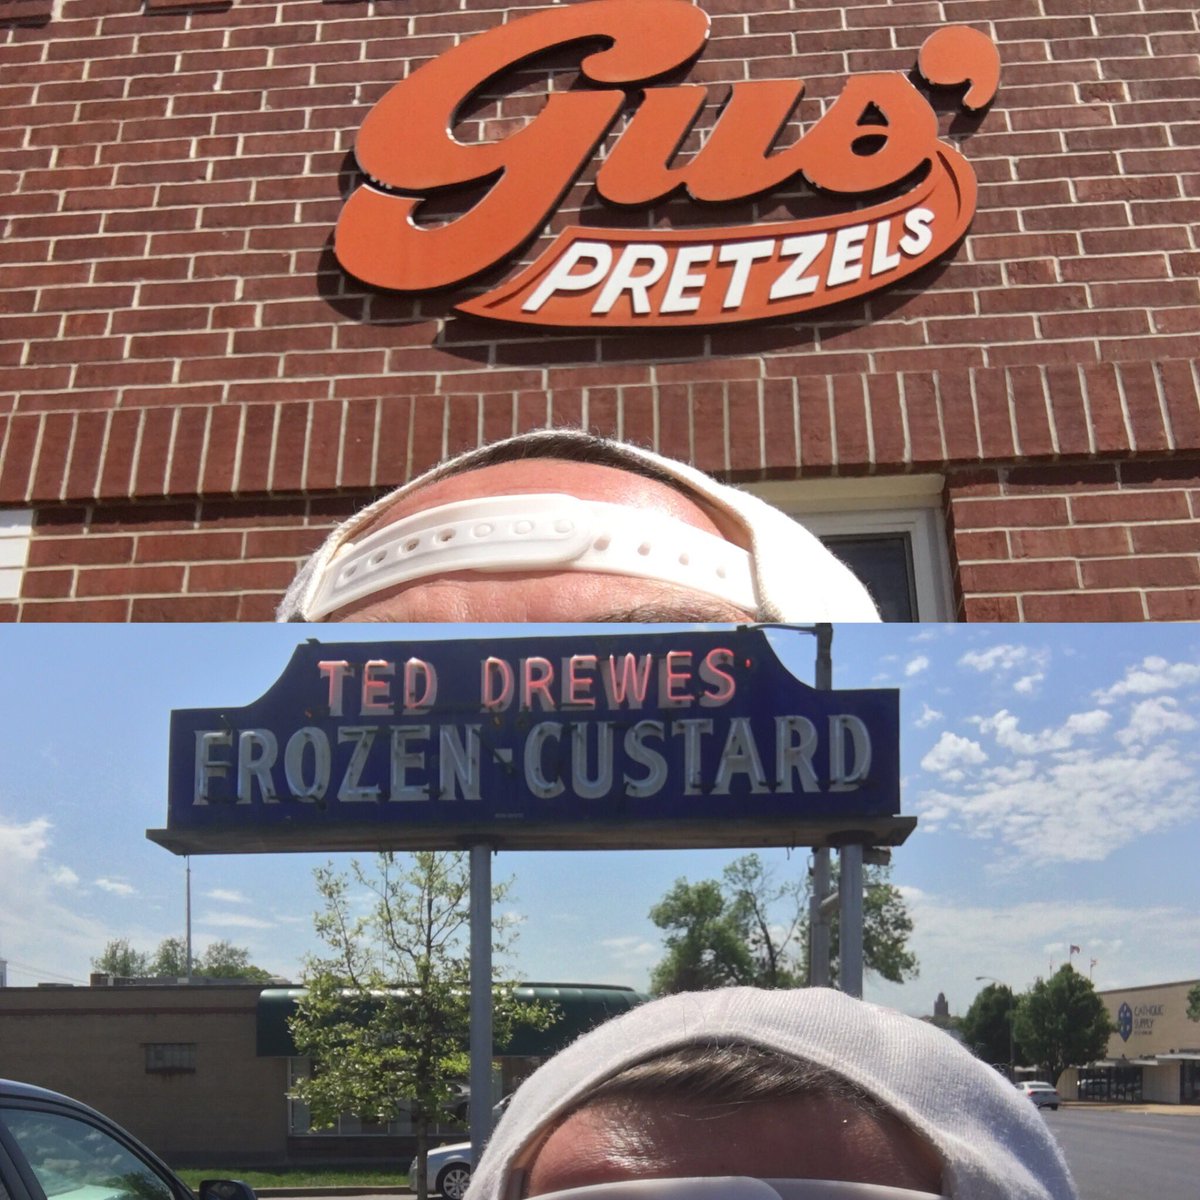 I took some of your #STLouis suggestions and hit some local faves for pretzels and custard. https://t.co/A3l78Pa7Ny